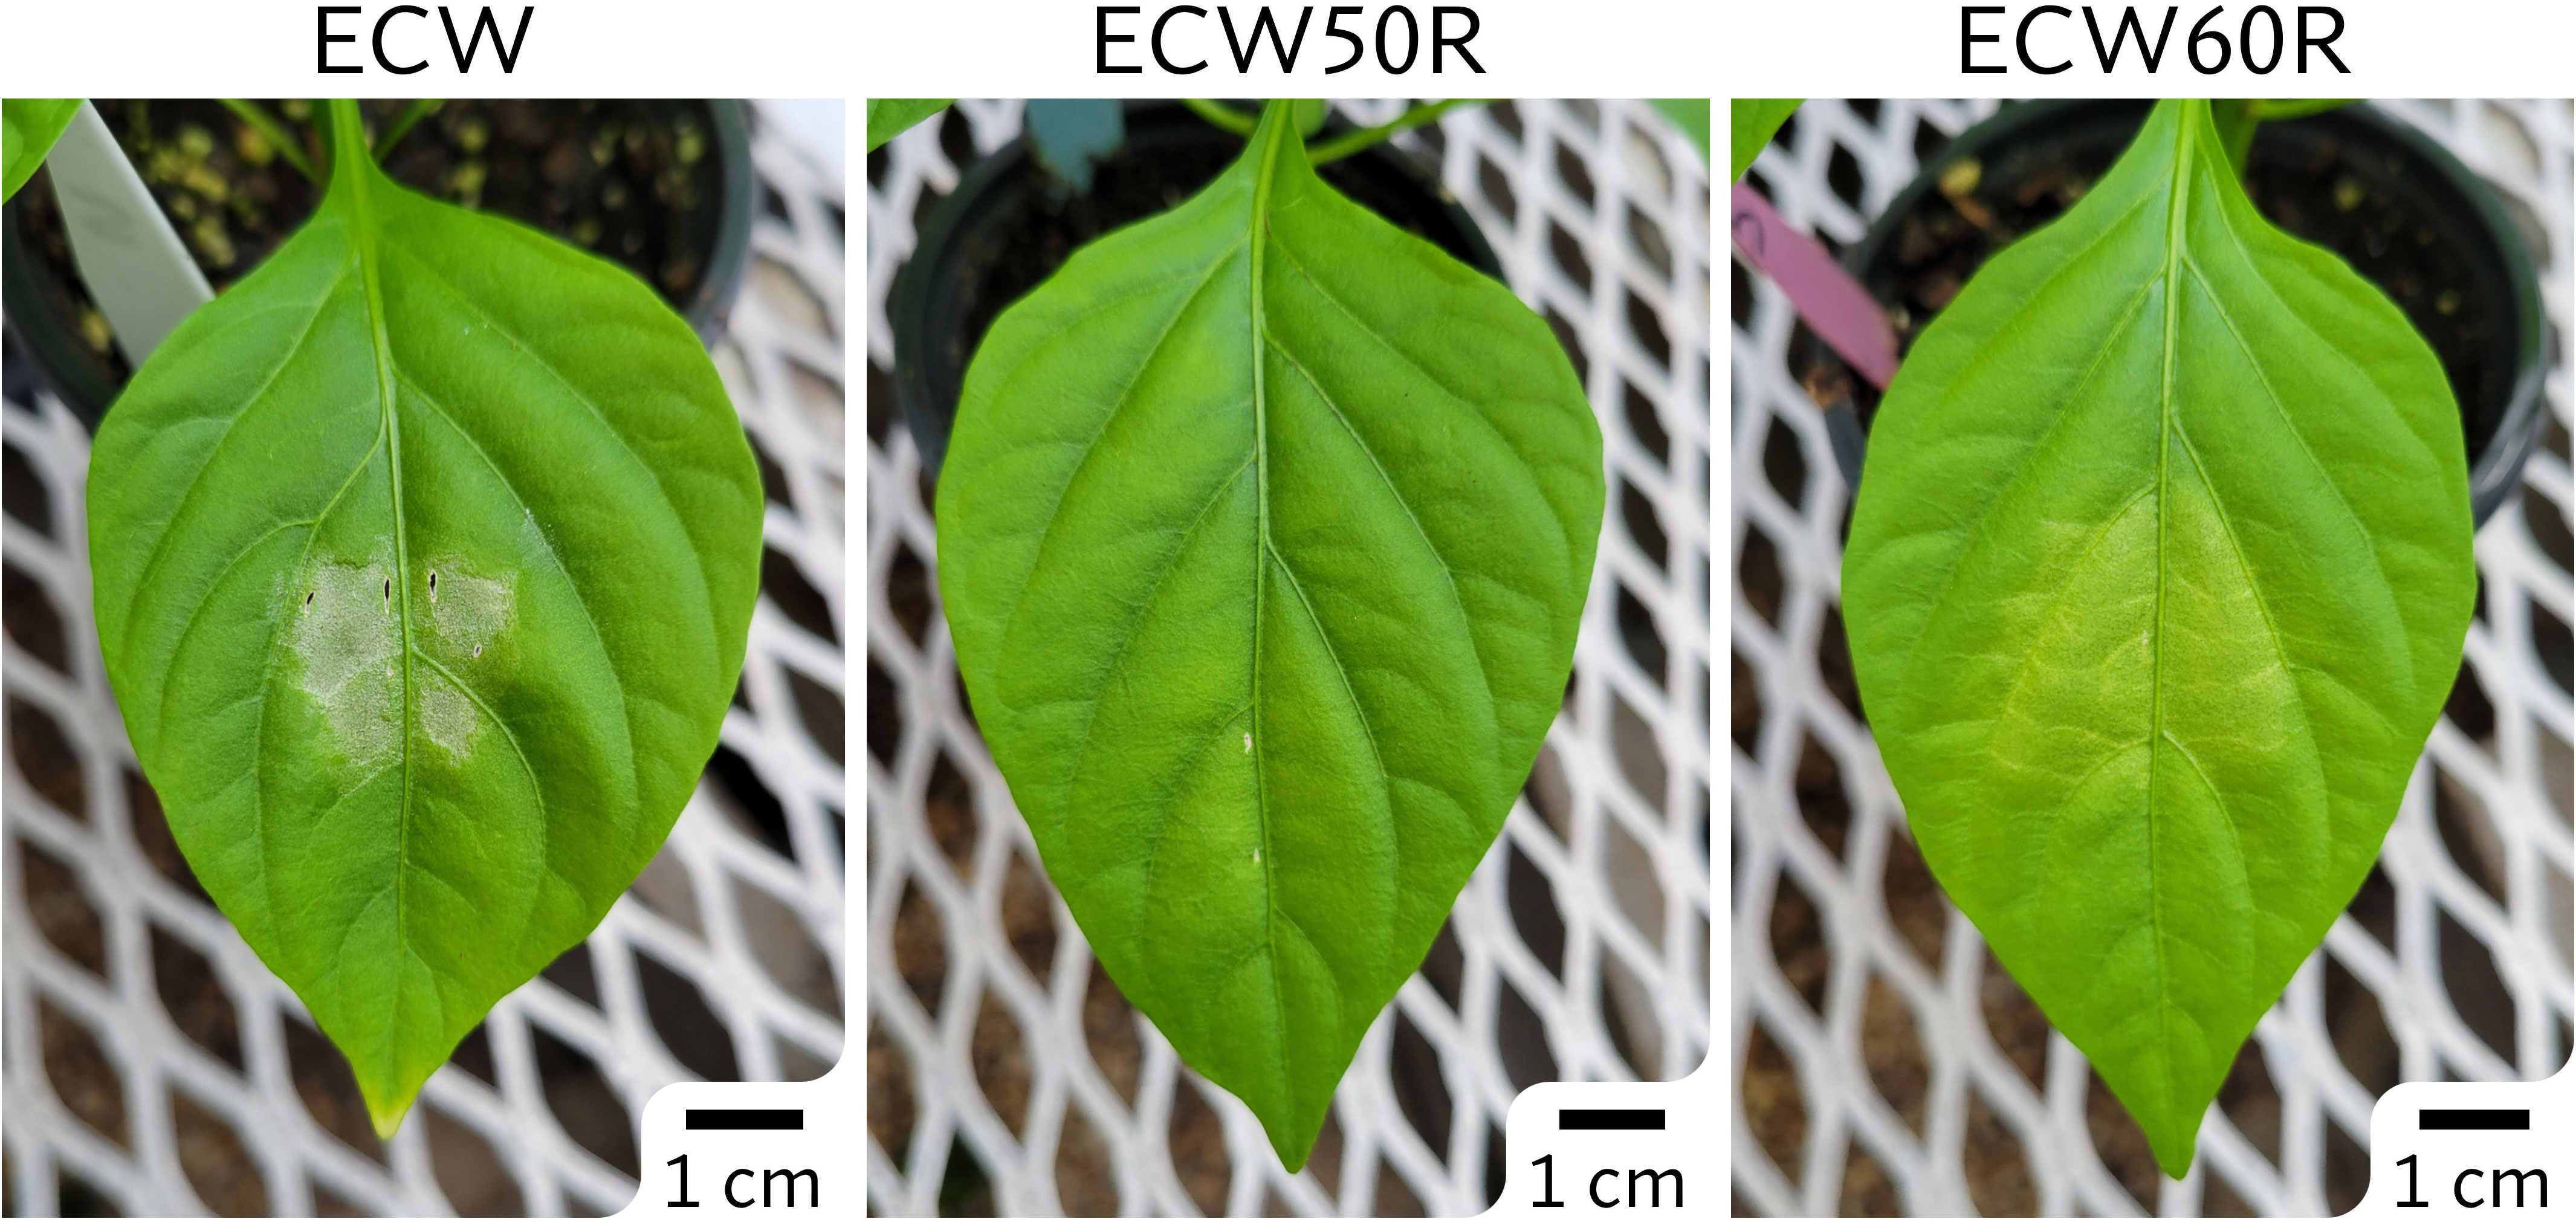 bs5 recessive resistances and of against Frontiers of | bacterial pepper spot Mapping bs6 the non-race-specific